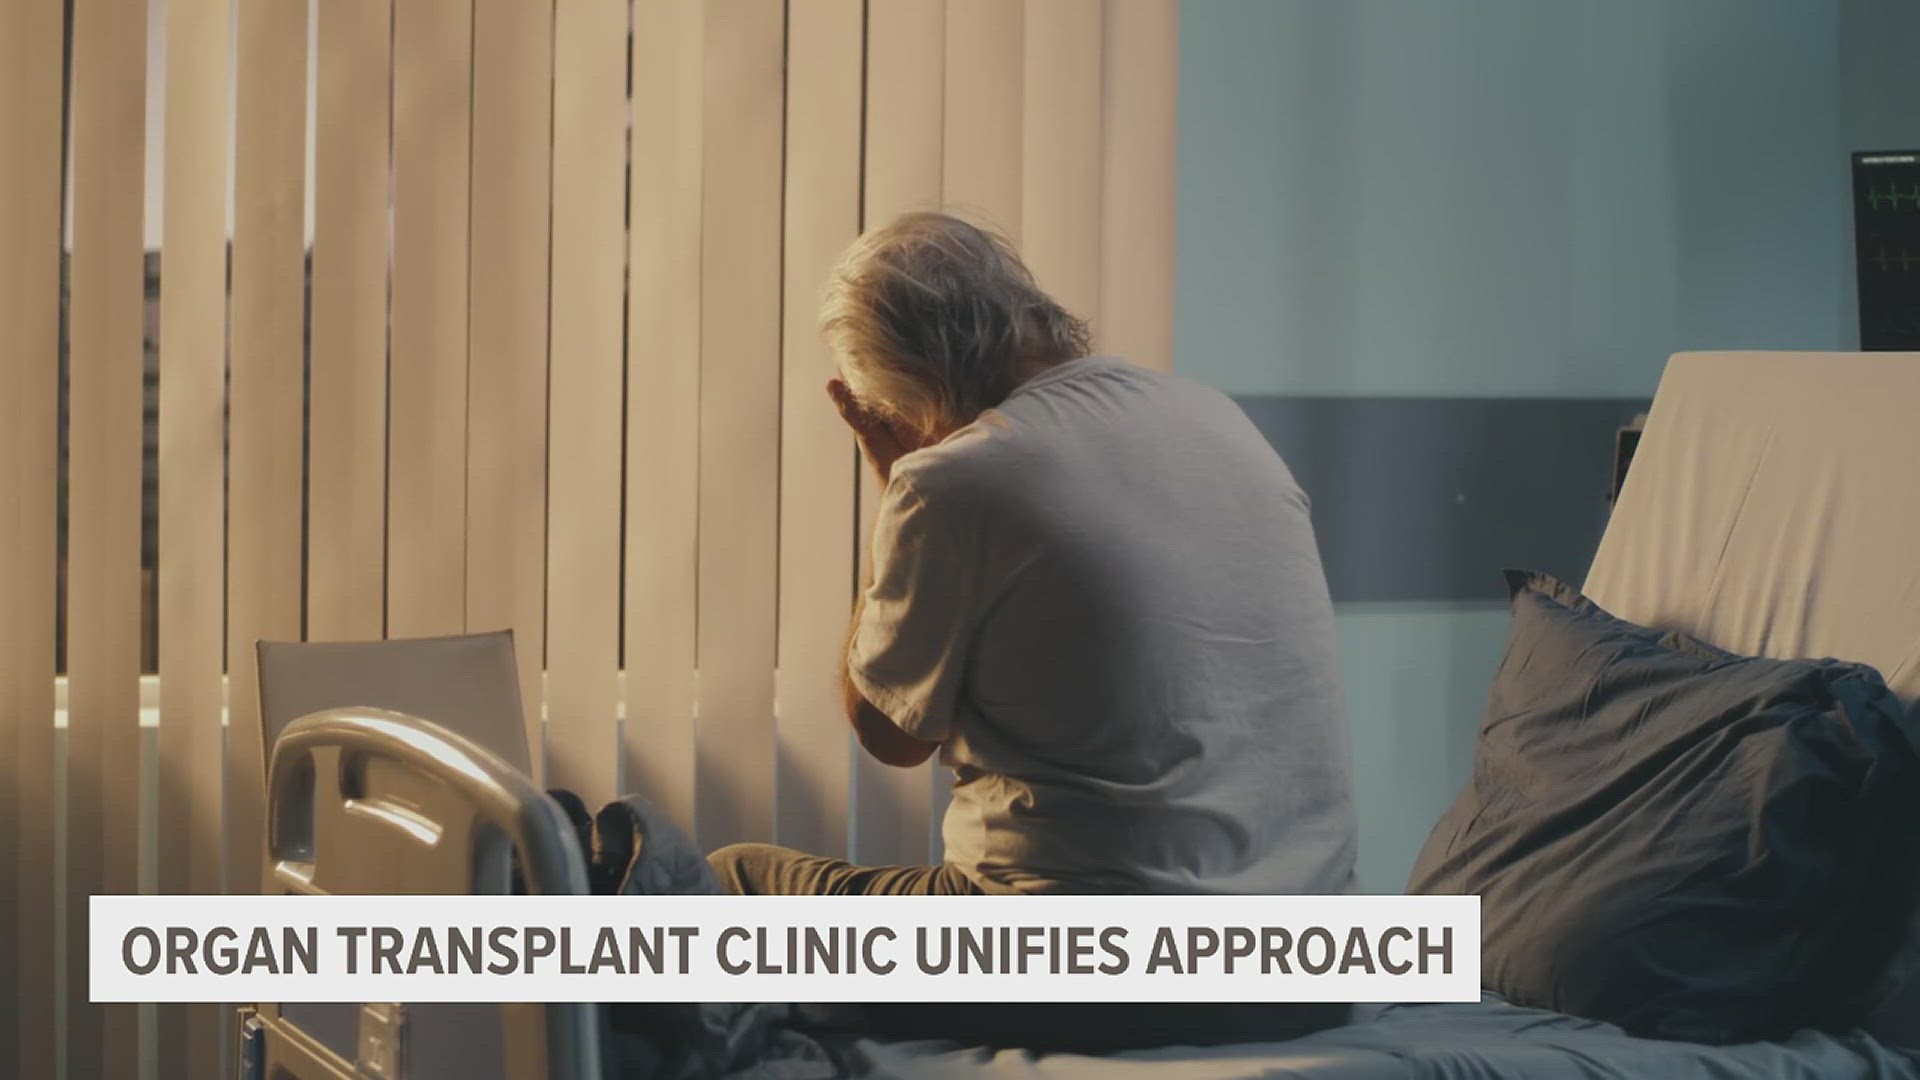 The Cancer and Organ Clinic in Seattle is redefining organ transplant care by integrating specialists with their transplant doctors.